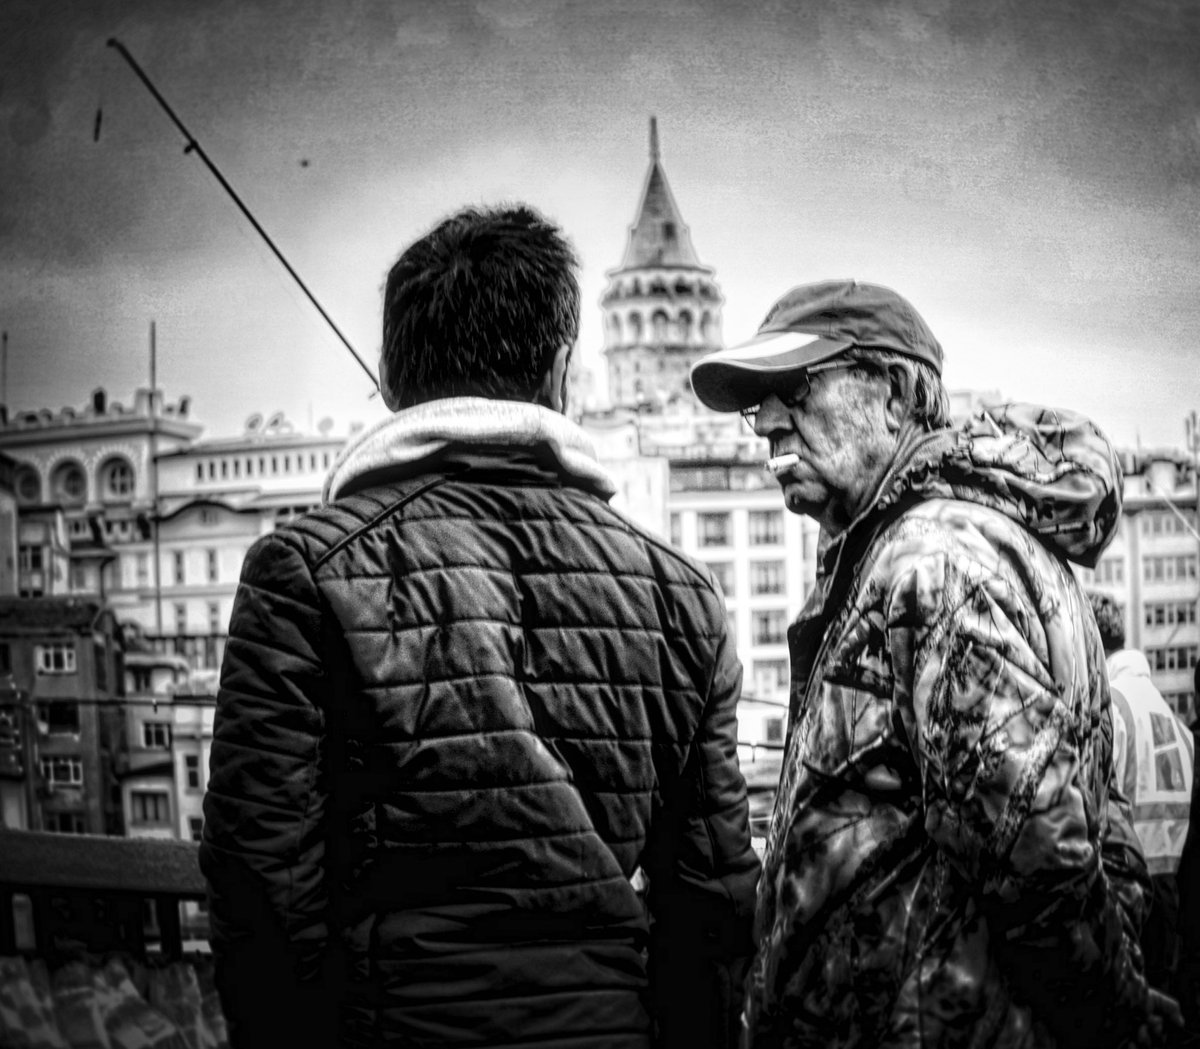 #tbt #istanbul #streetphotography #streetphoto #bnwphotography #photography #blackandwhite #womenstreetphotographers #noiretblanc #Monochrome #phojournalism #bnwphotography #SPICollective #lensculturestreets